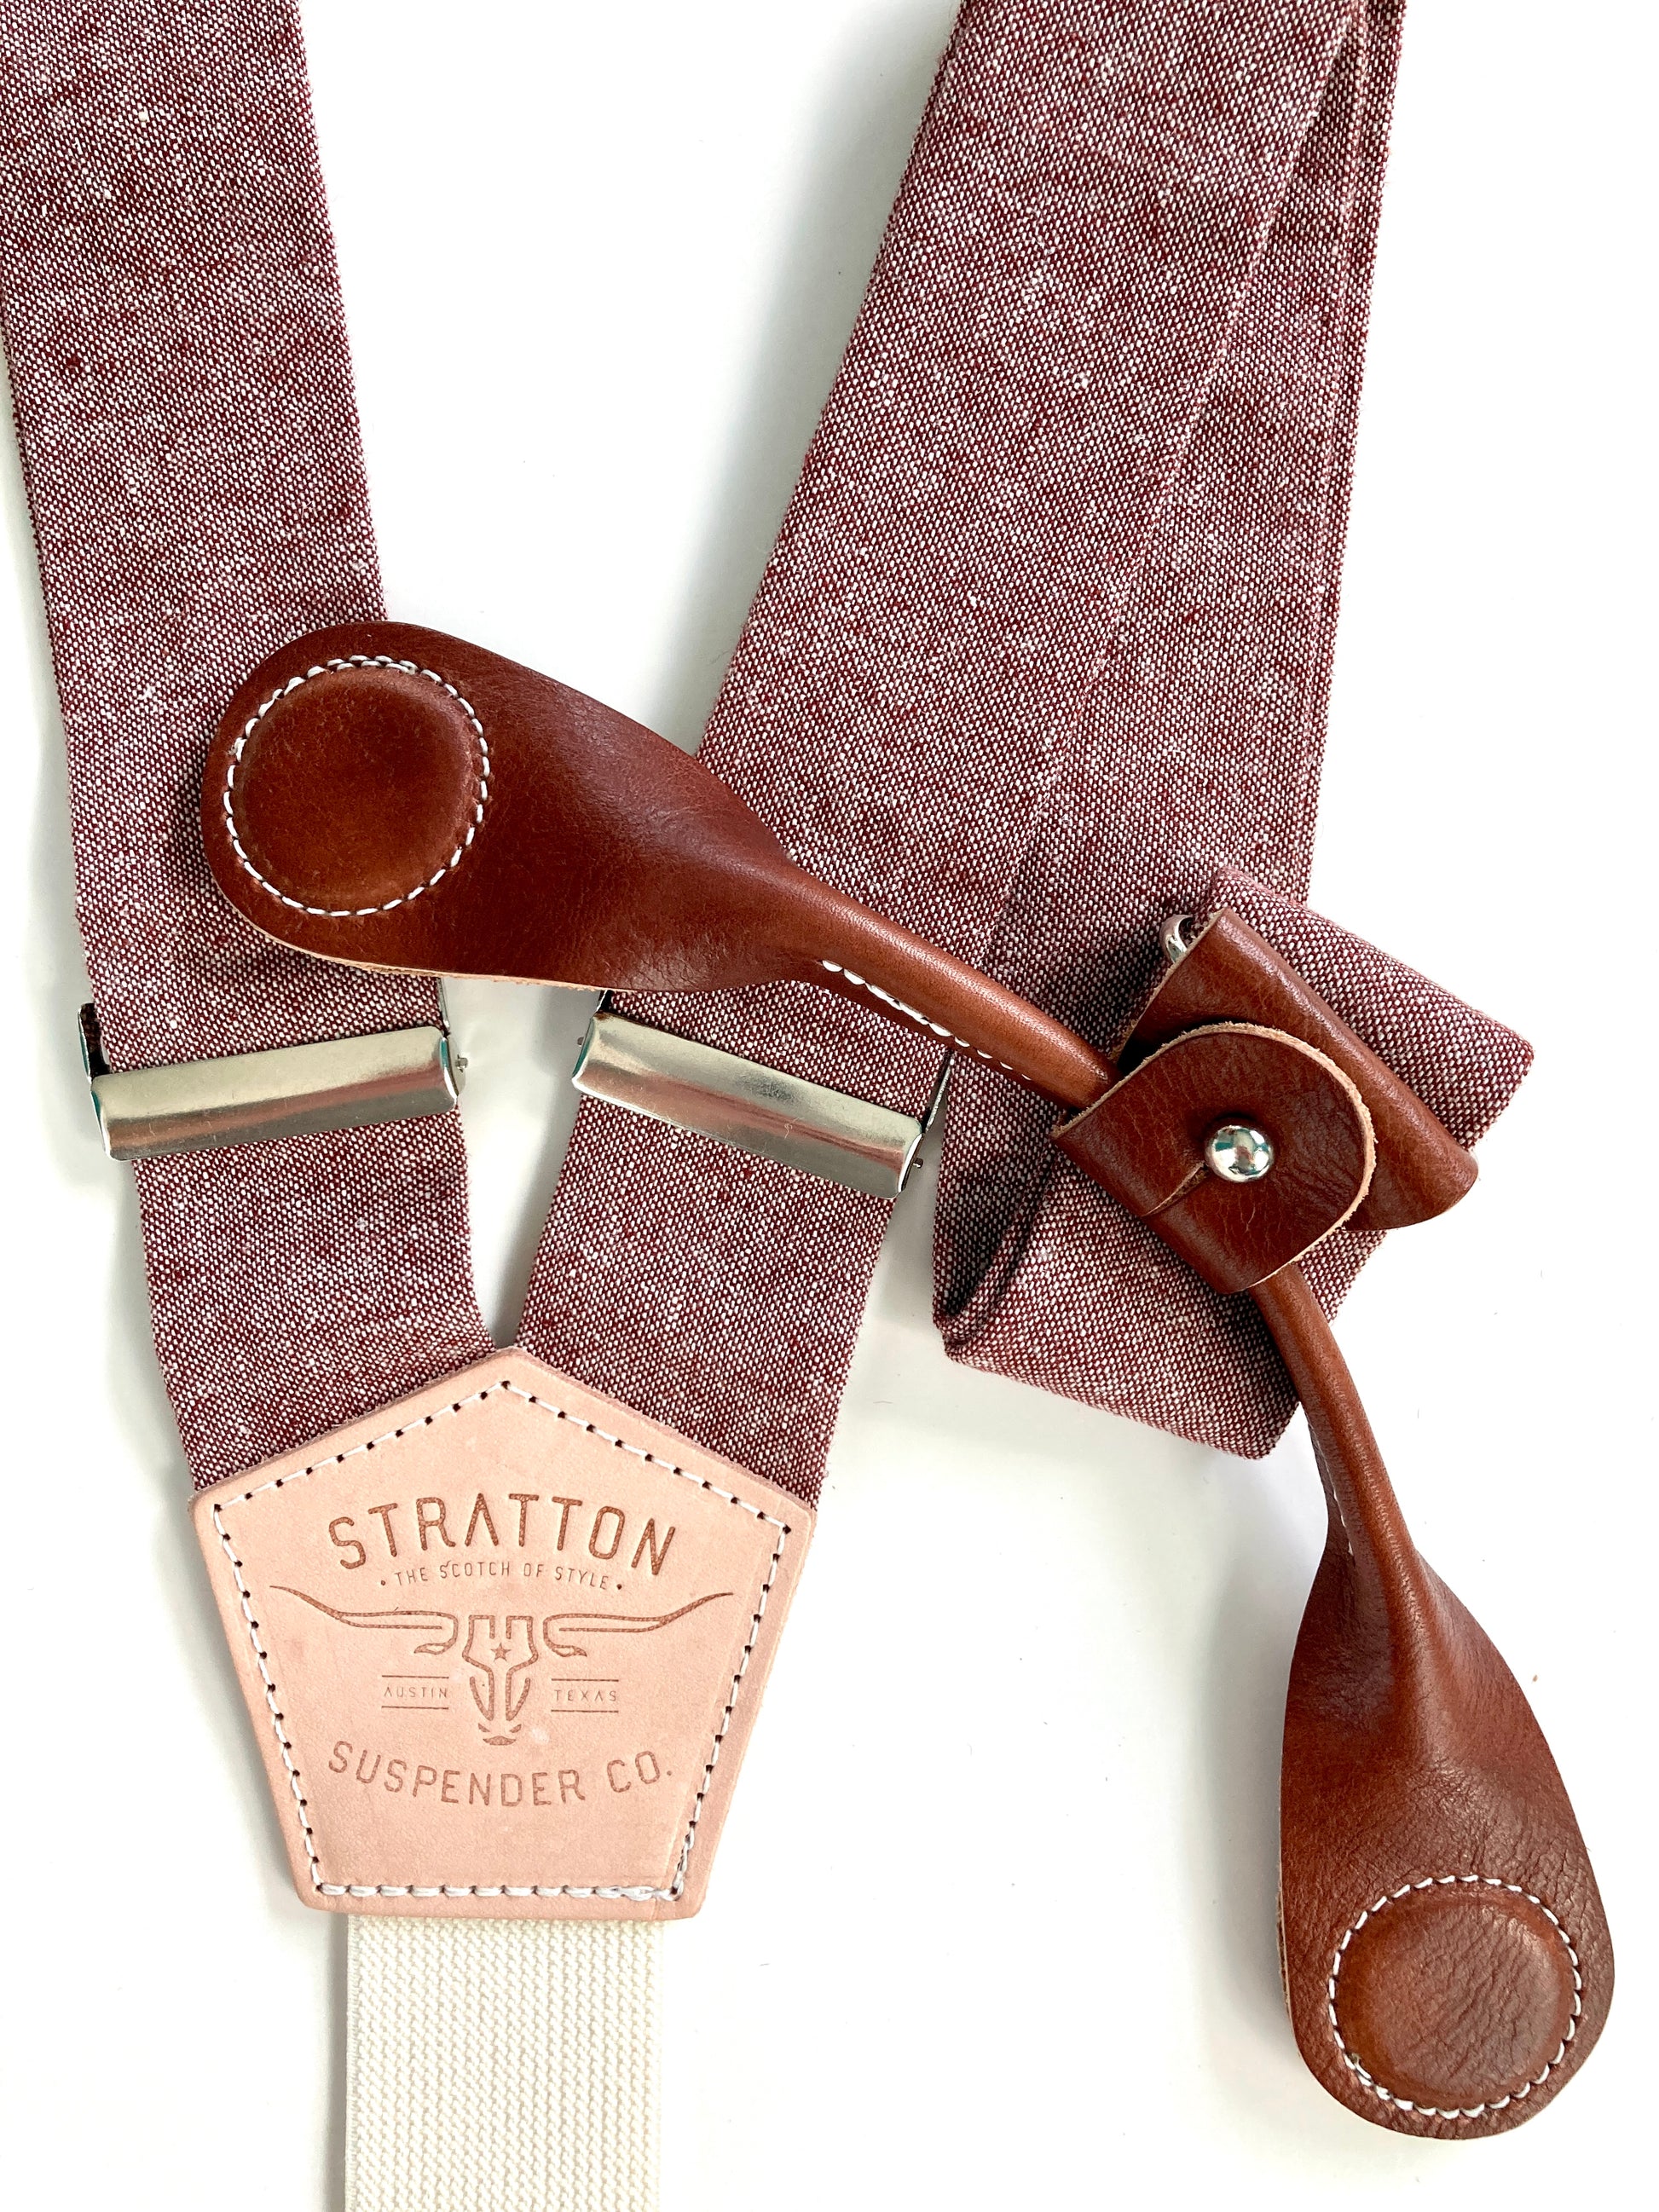 Stratton Suspender Co. features the Rust (Maroon) linen suspenders on veg tan shoulder leather with cream colored elastic back strap for the Fall 2022 suspenders collection Magnetic Stratton Suspender clasps in Cognac Pontedero Italian leather hand-picked by Stratton Suspender Co.